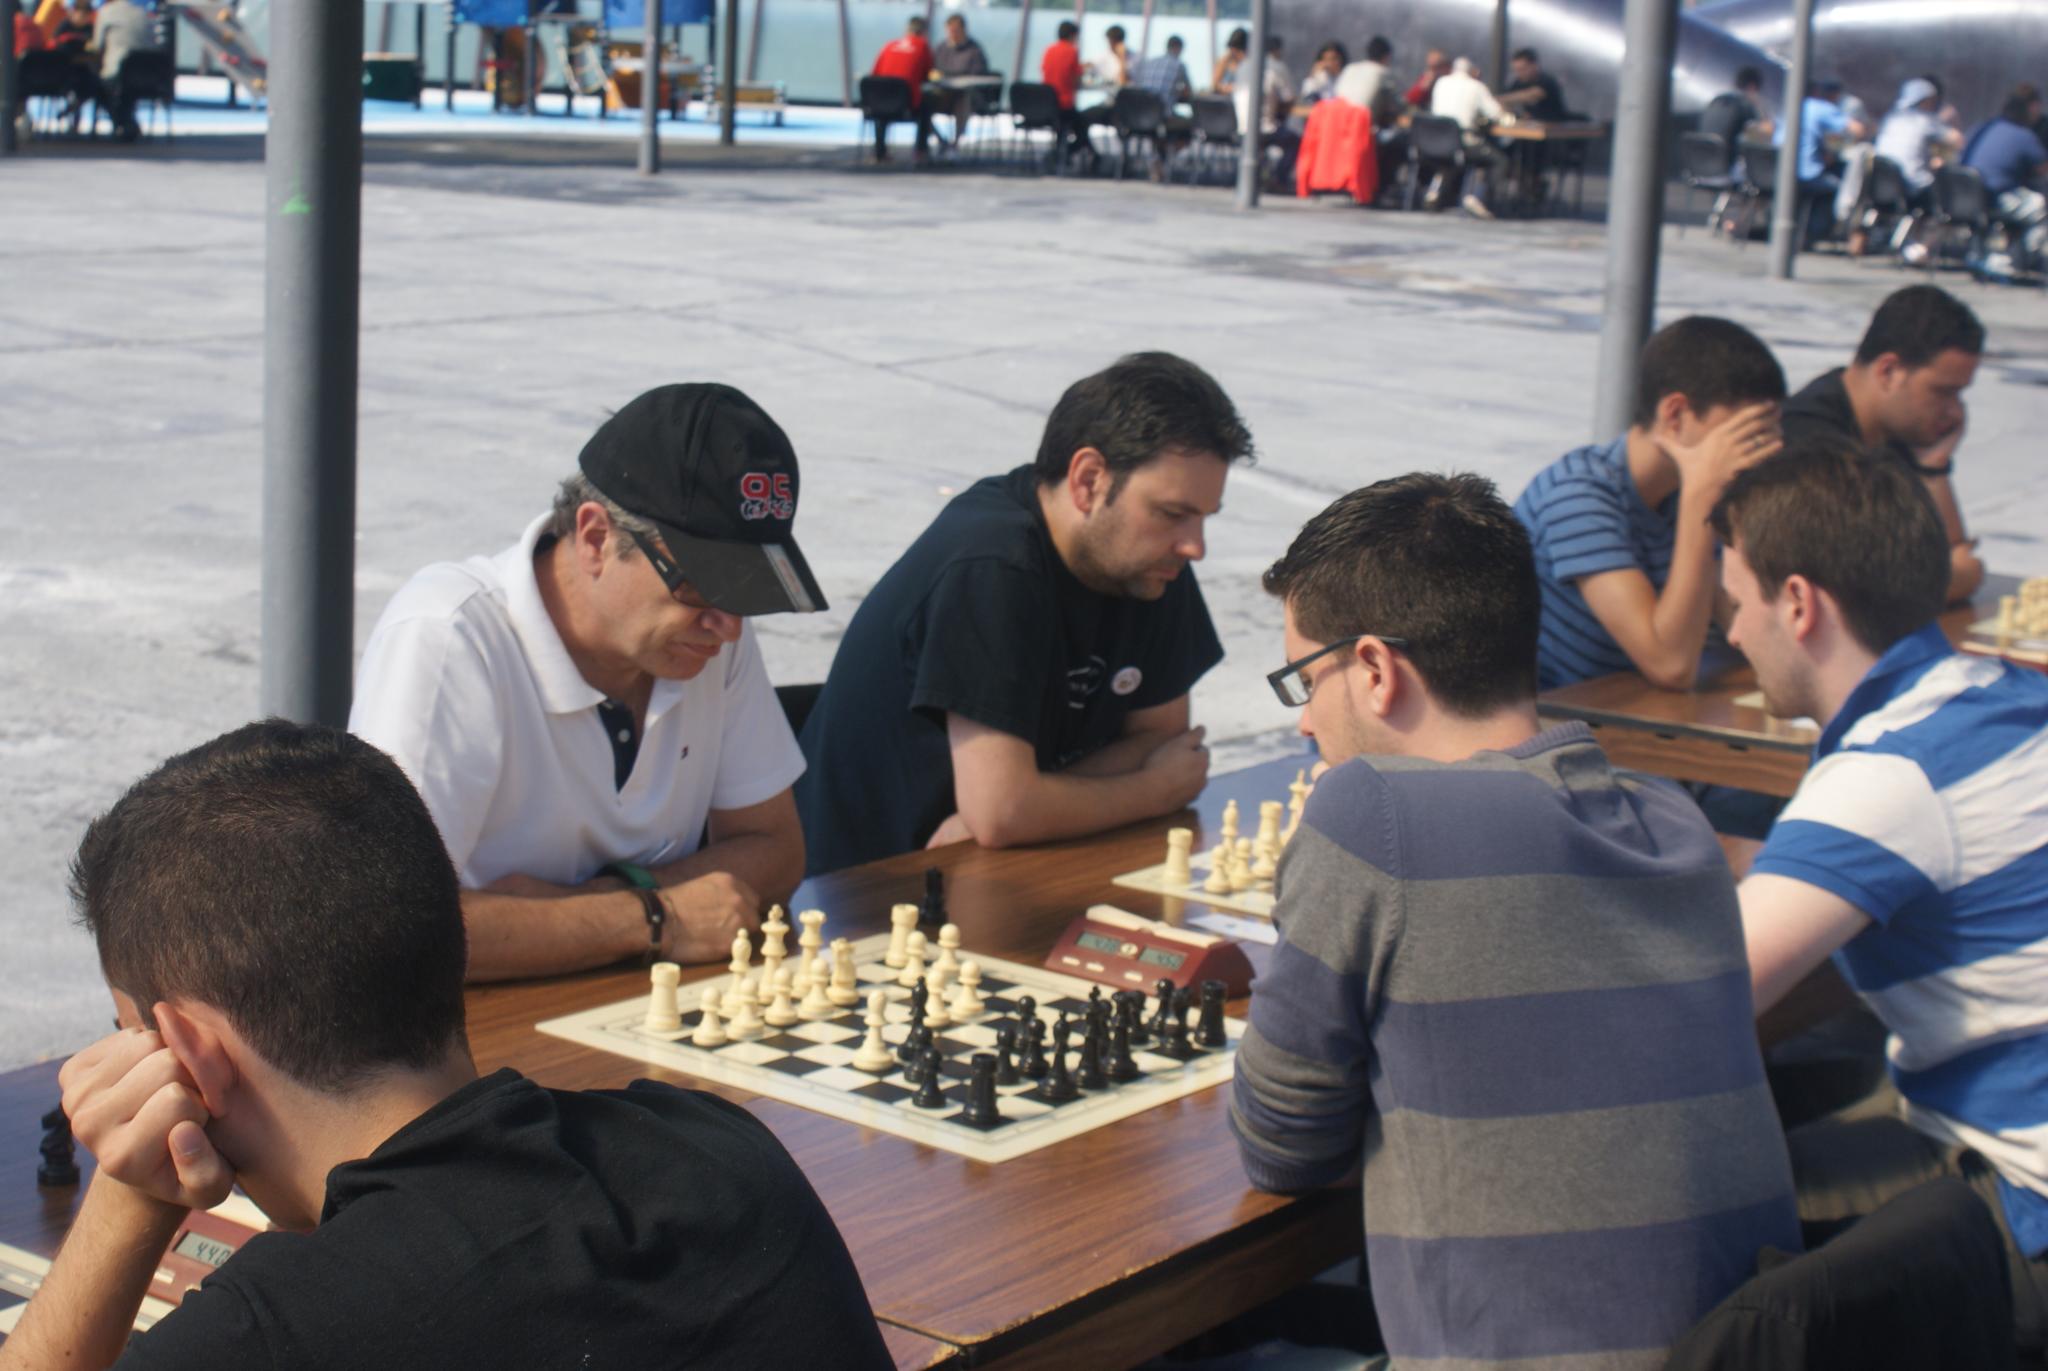 several people are sitting around a table with chess